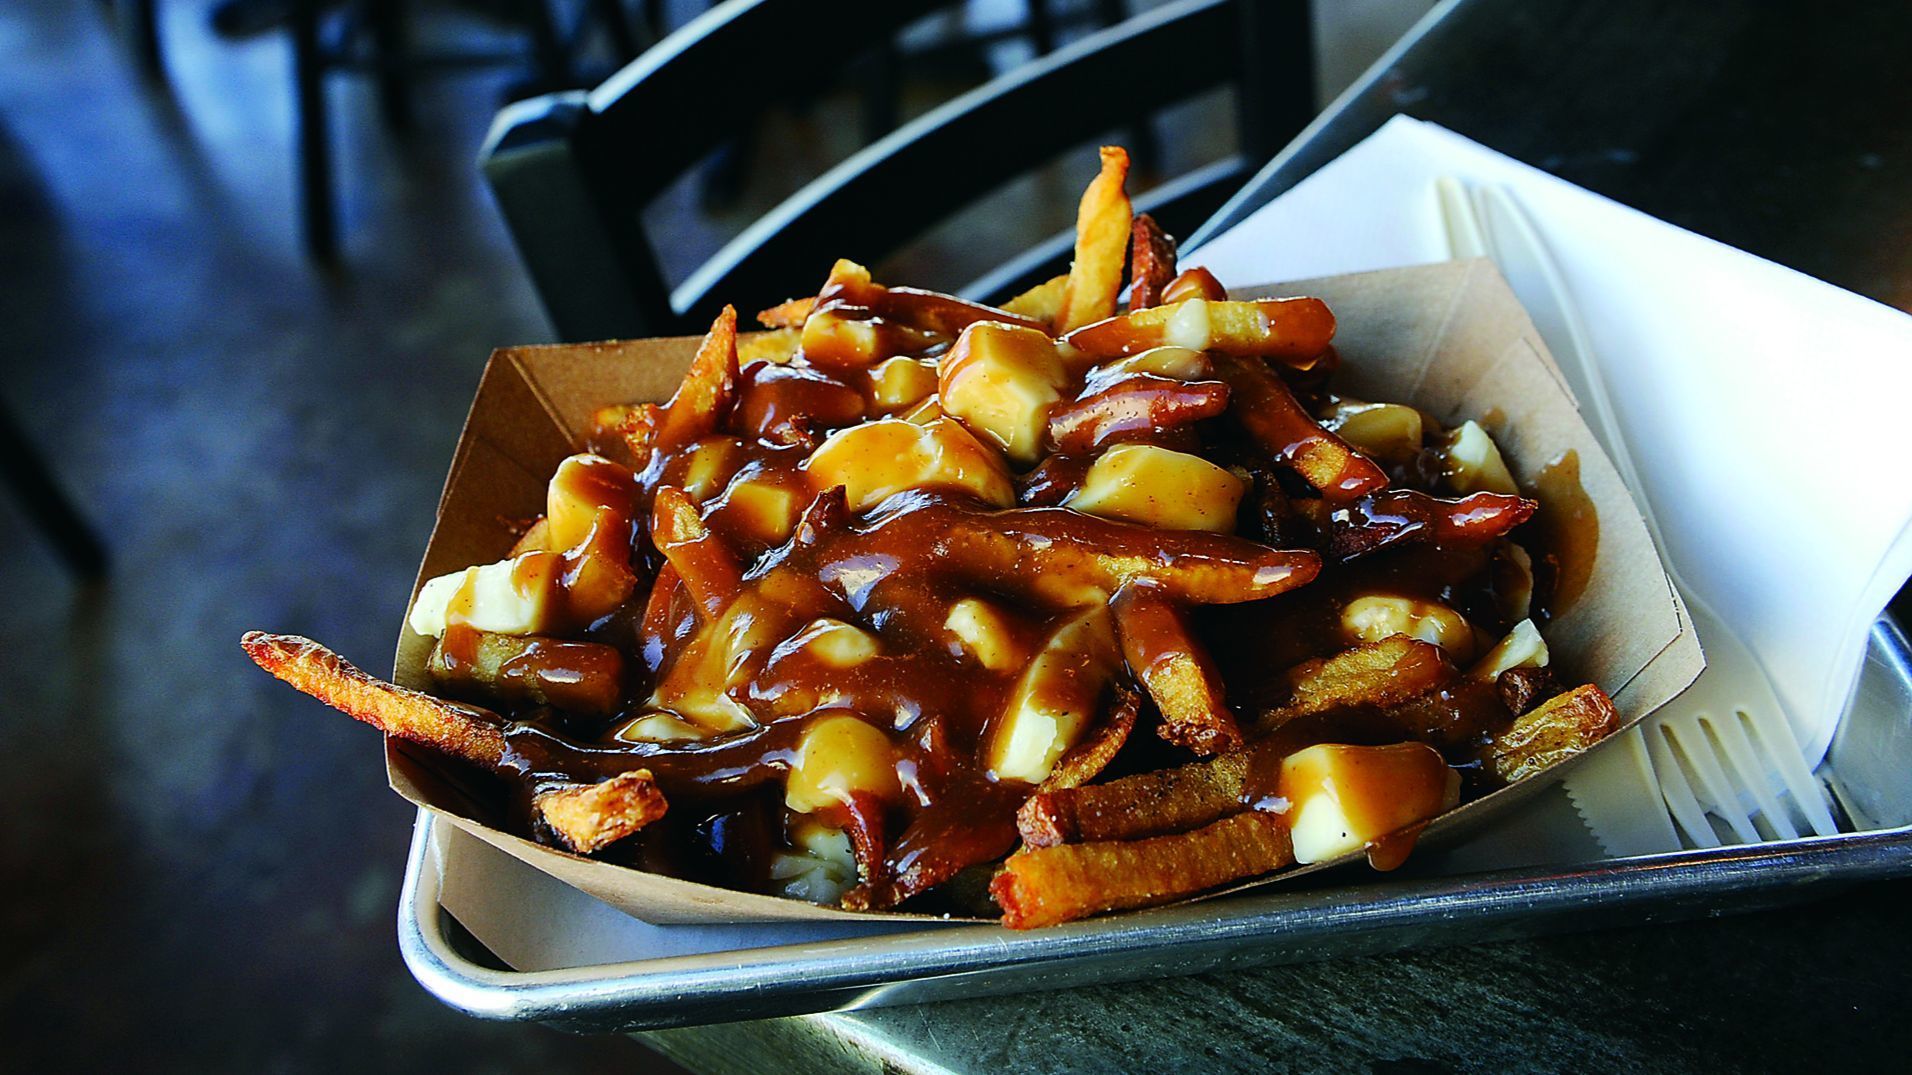 Baltimore, MD--February 20, 2015-- This is the Classique Poutine at Clark Burger, a new restaurant a